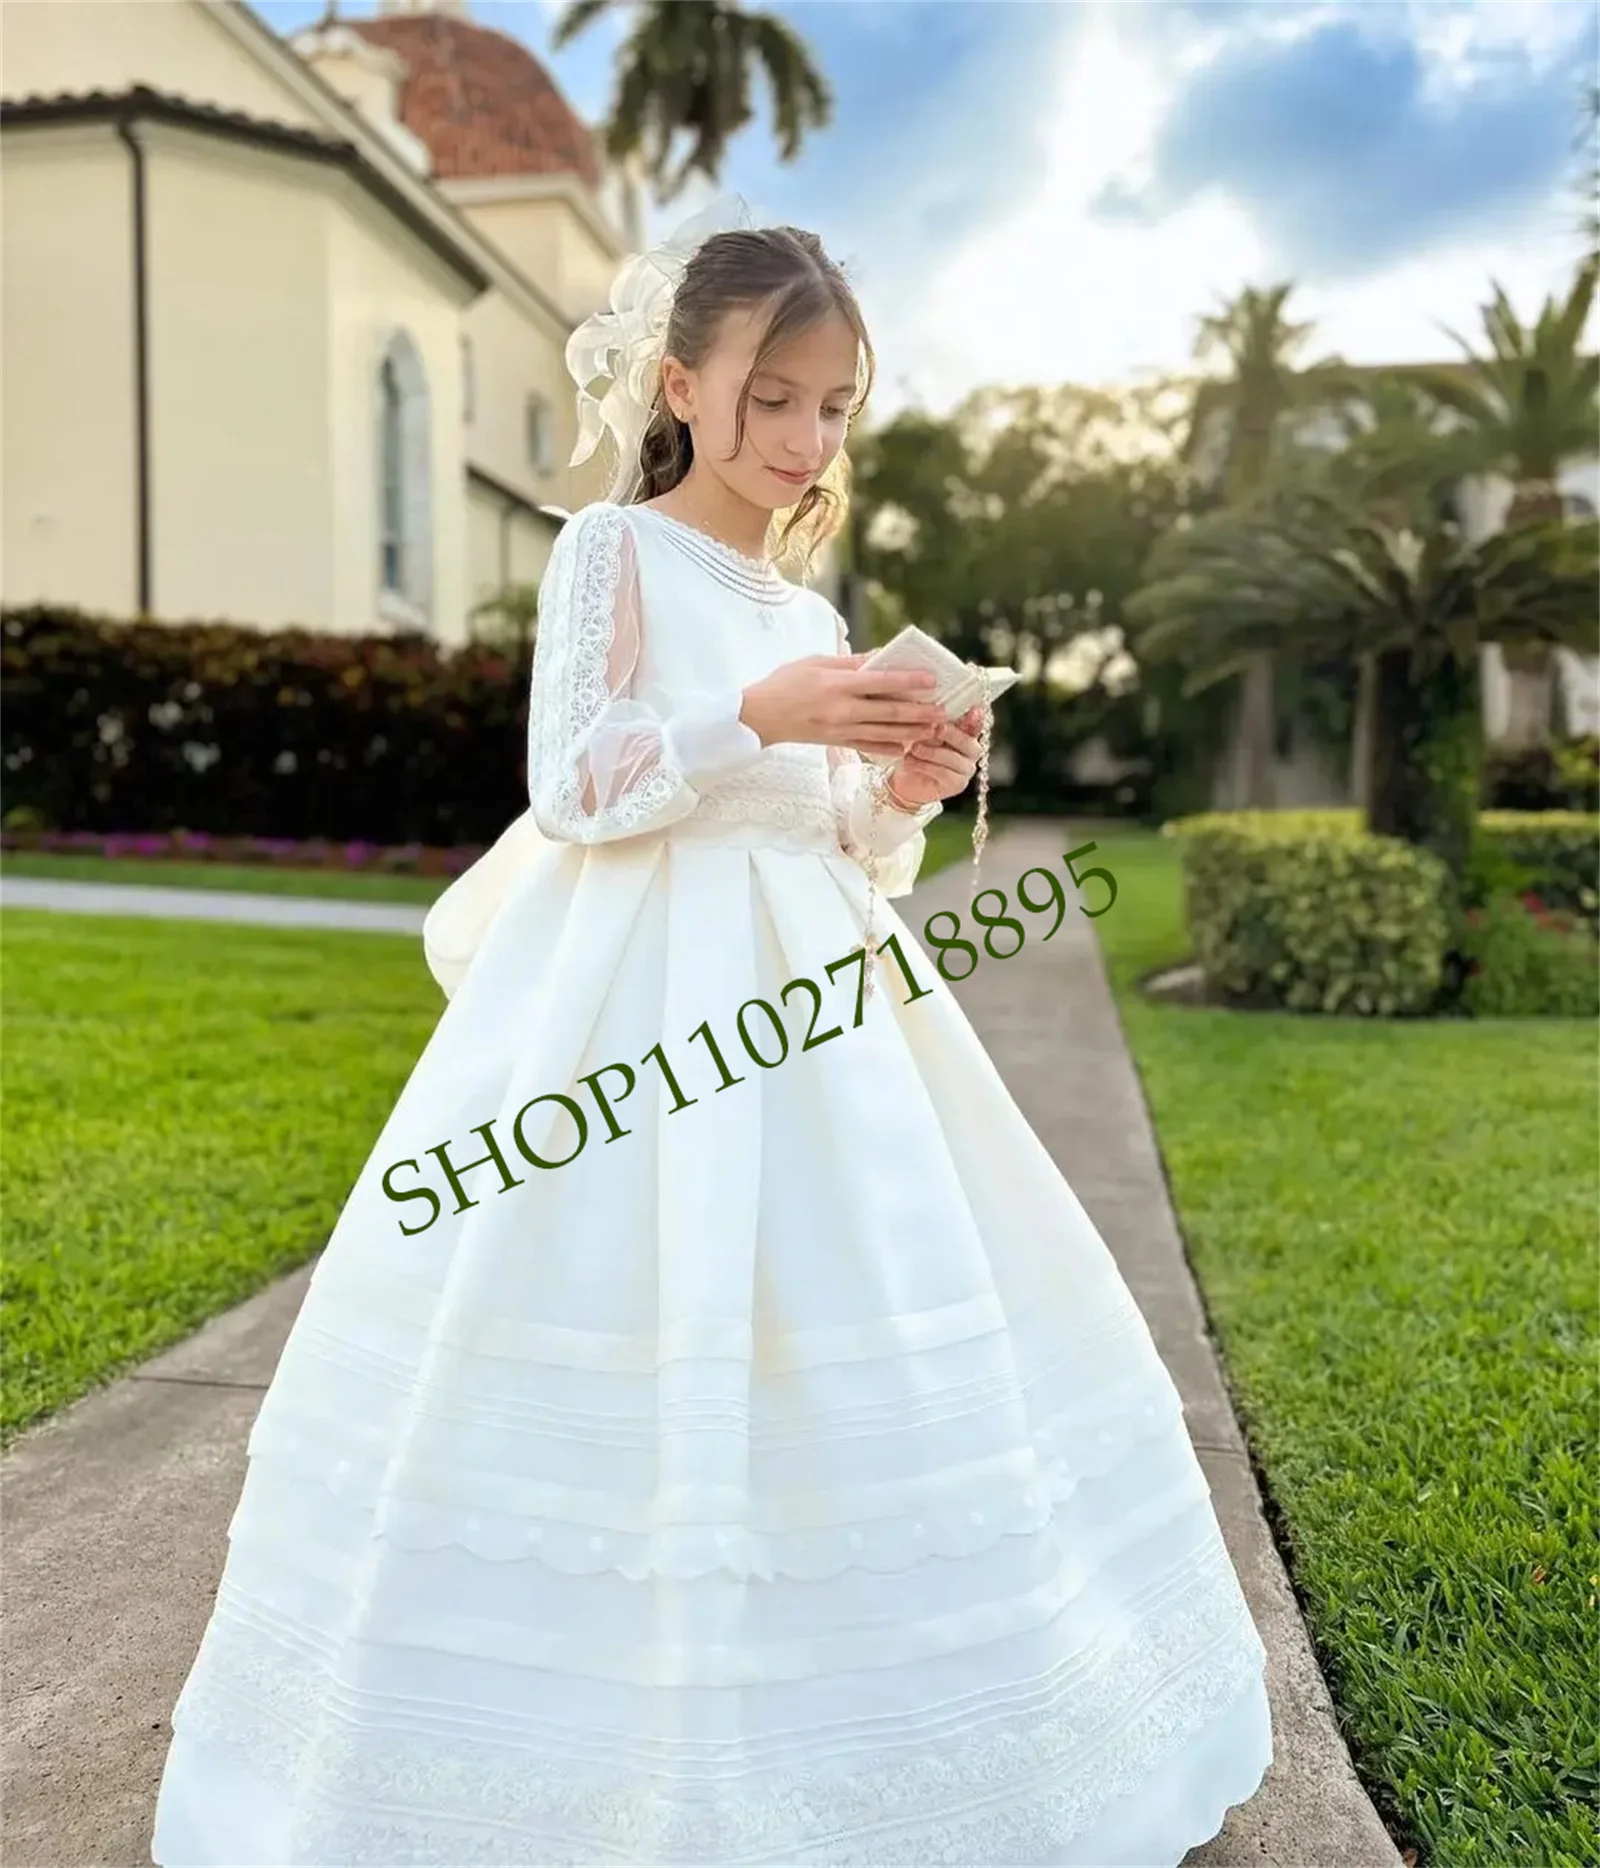 

First Communion Dress Made with Satin Fabric Long Sleeves with Vintage-like Laces Bow and Covered Buttons for Closure